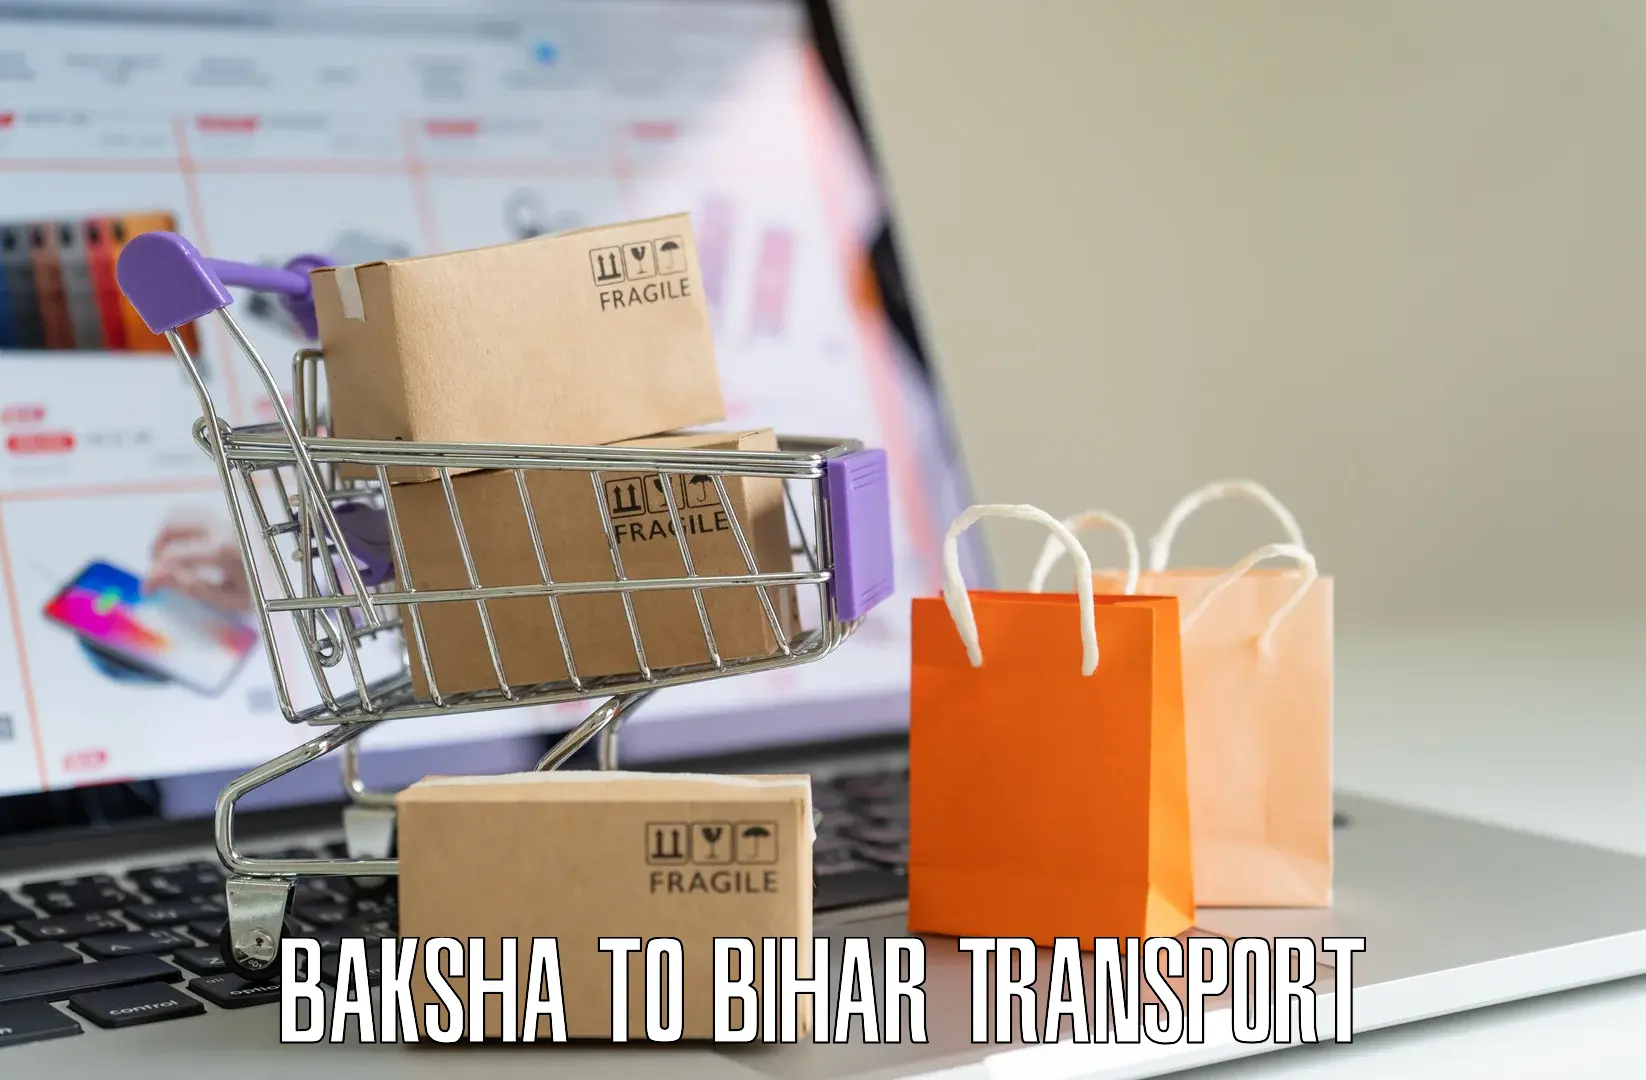 Transport bike from one state to another Baksha to Bihar